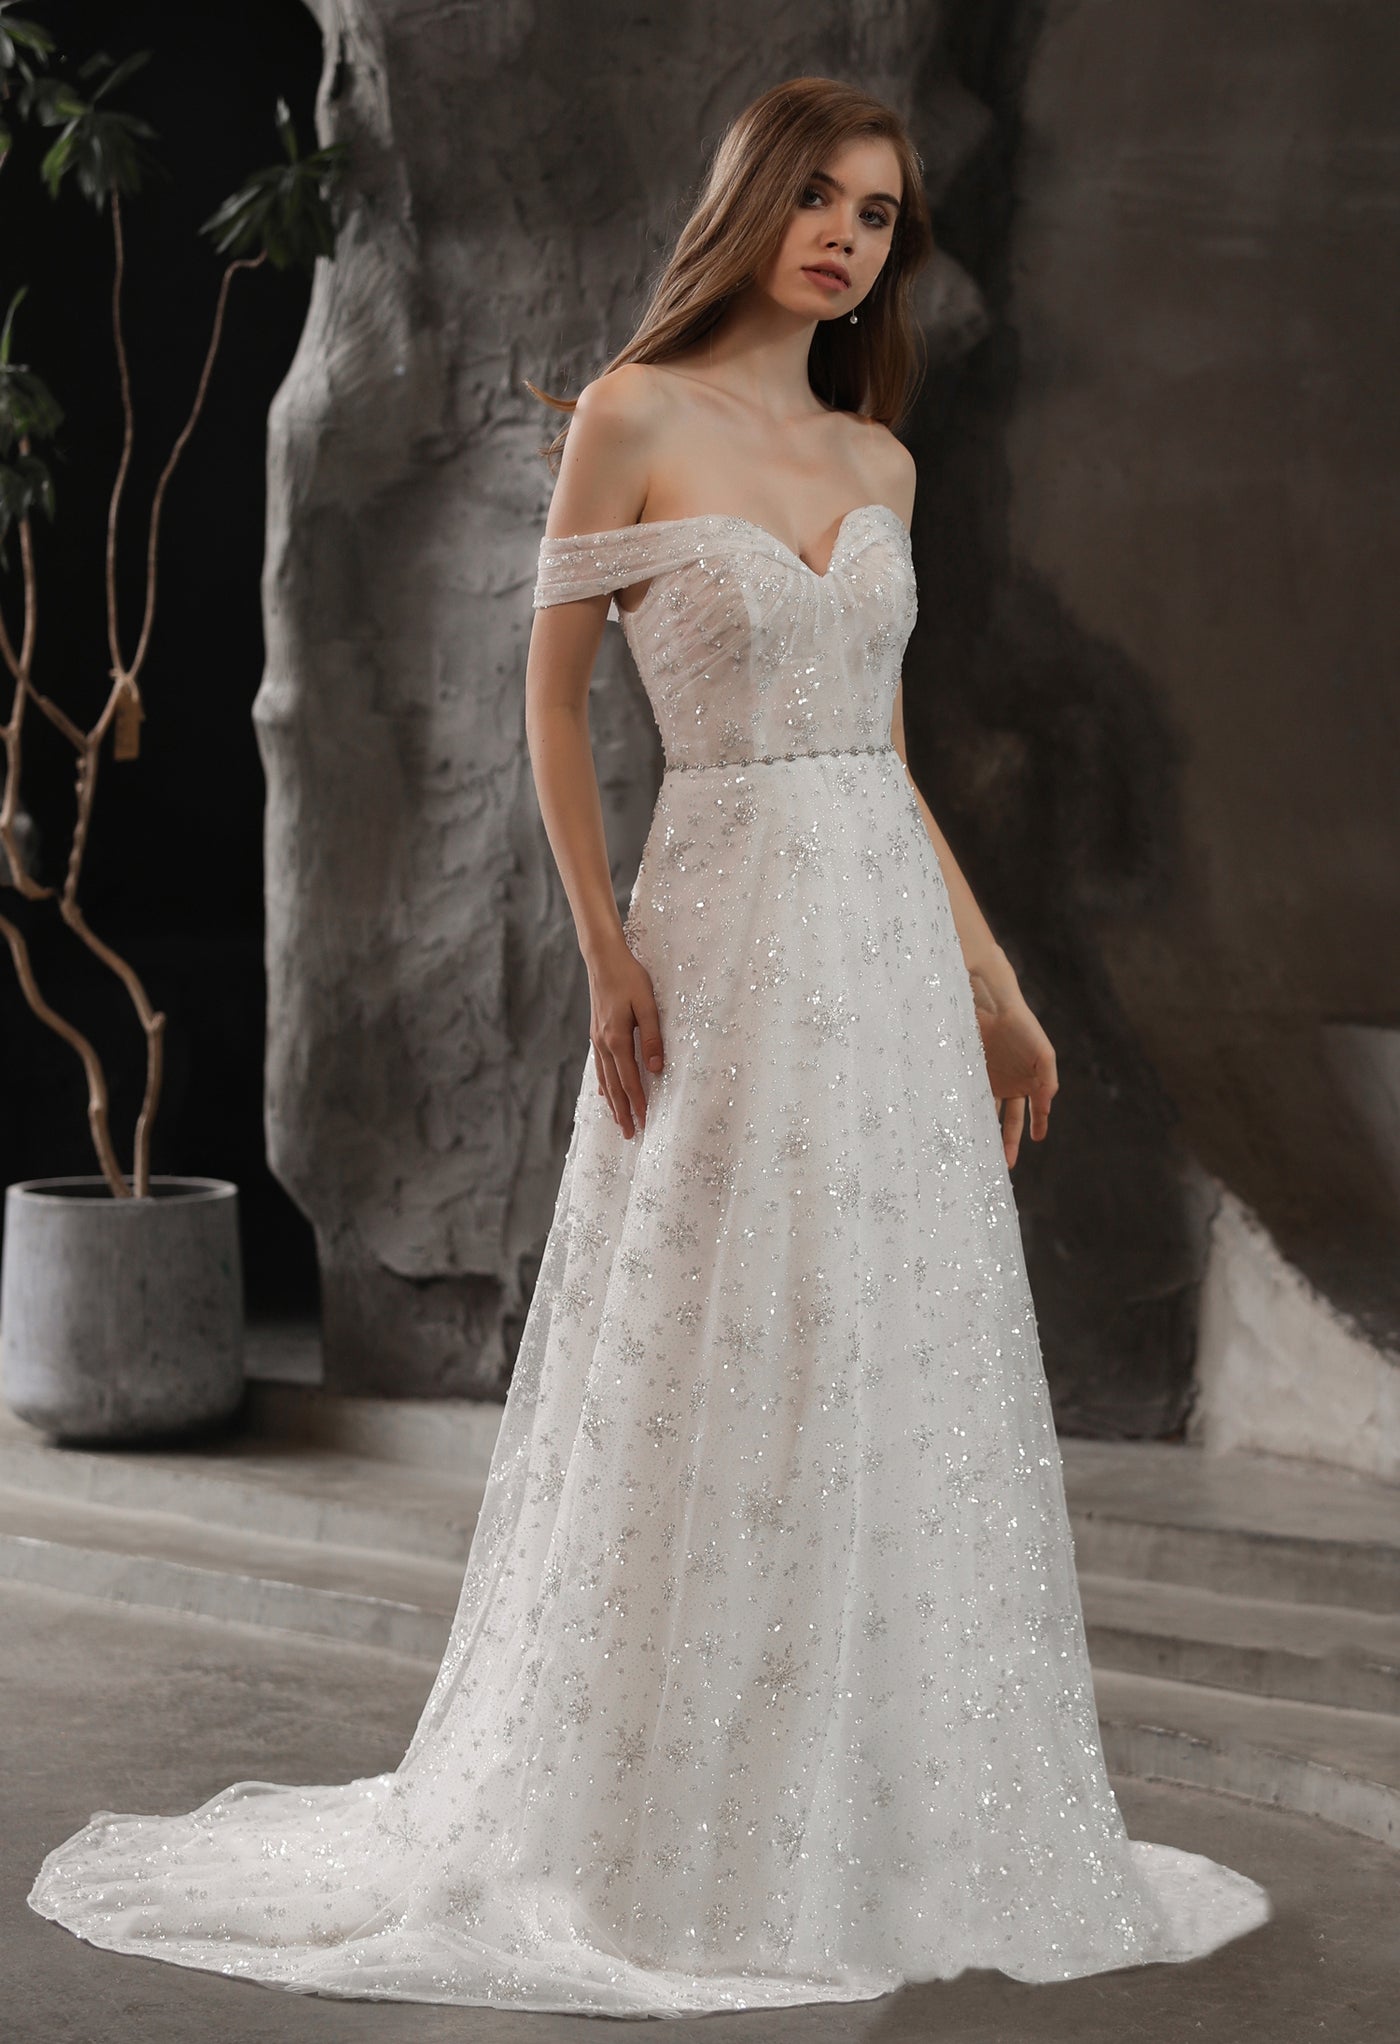 Sparkly Wedding Dresses Bridal Gown with Sleeves